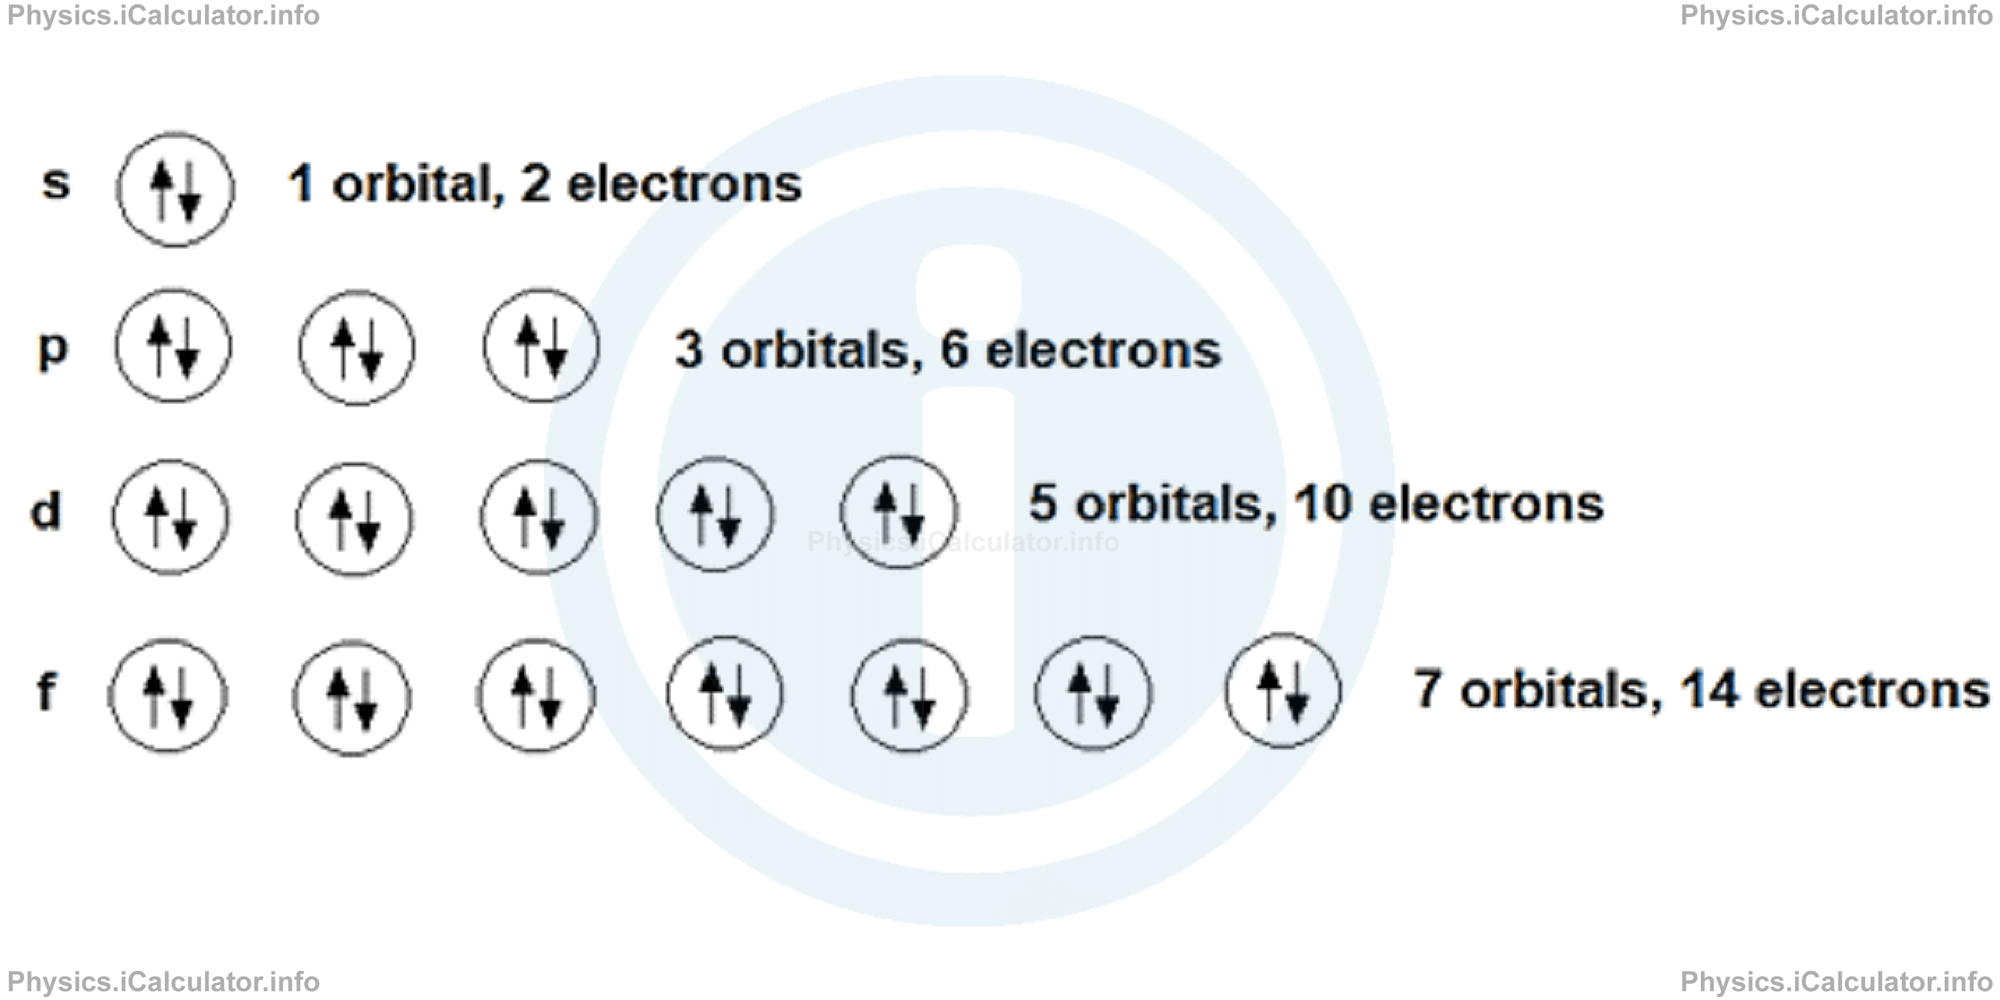 Physics Tutorials: This image provides visual information for the physics tutorial Elementary Particles 